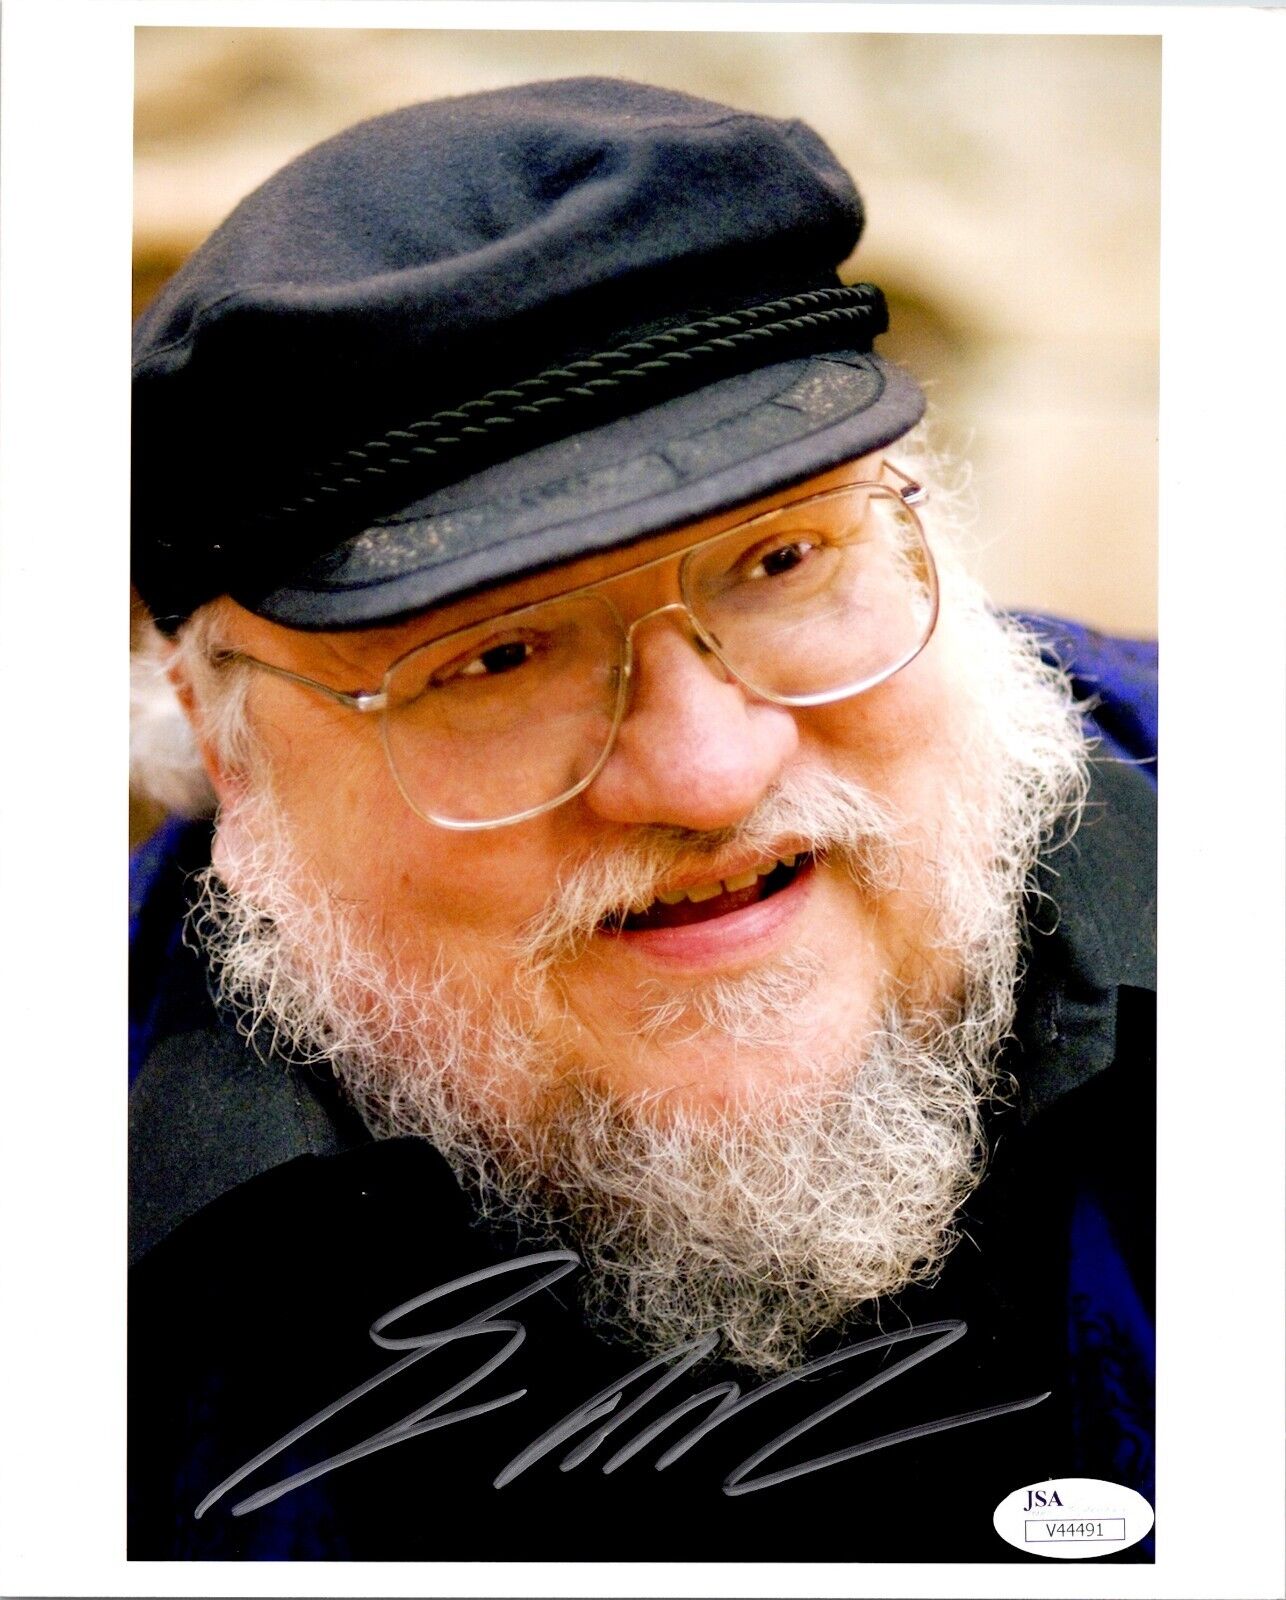 George R.R. Martin 'Game of Thrones' Autographed 8x10 Photo JSA